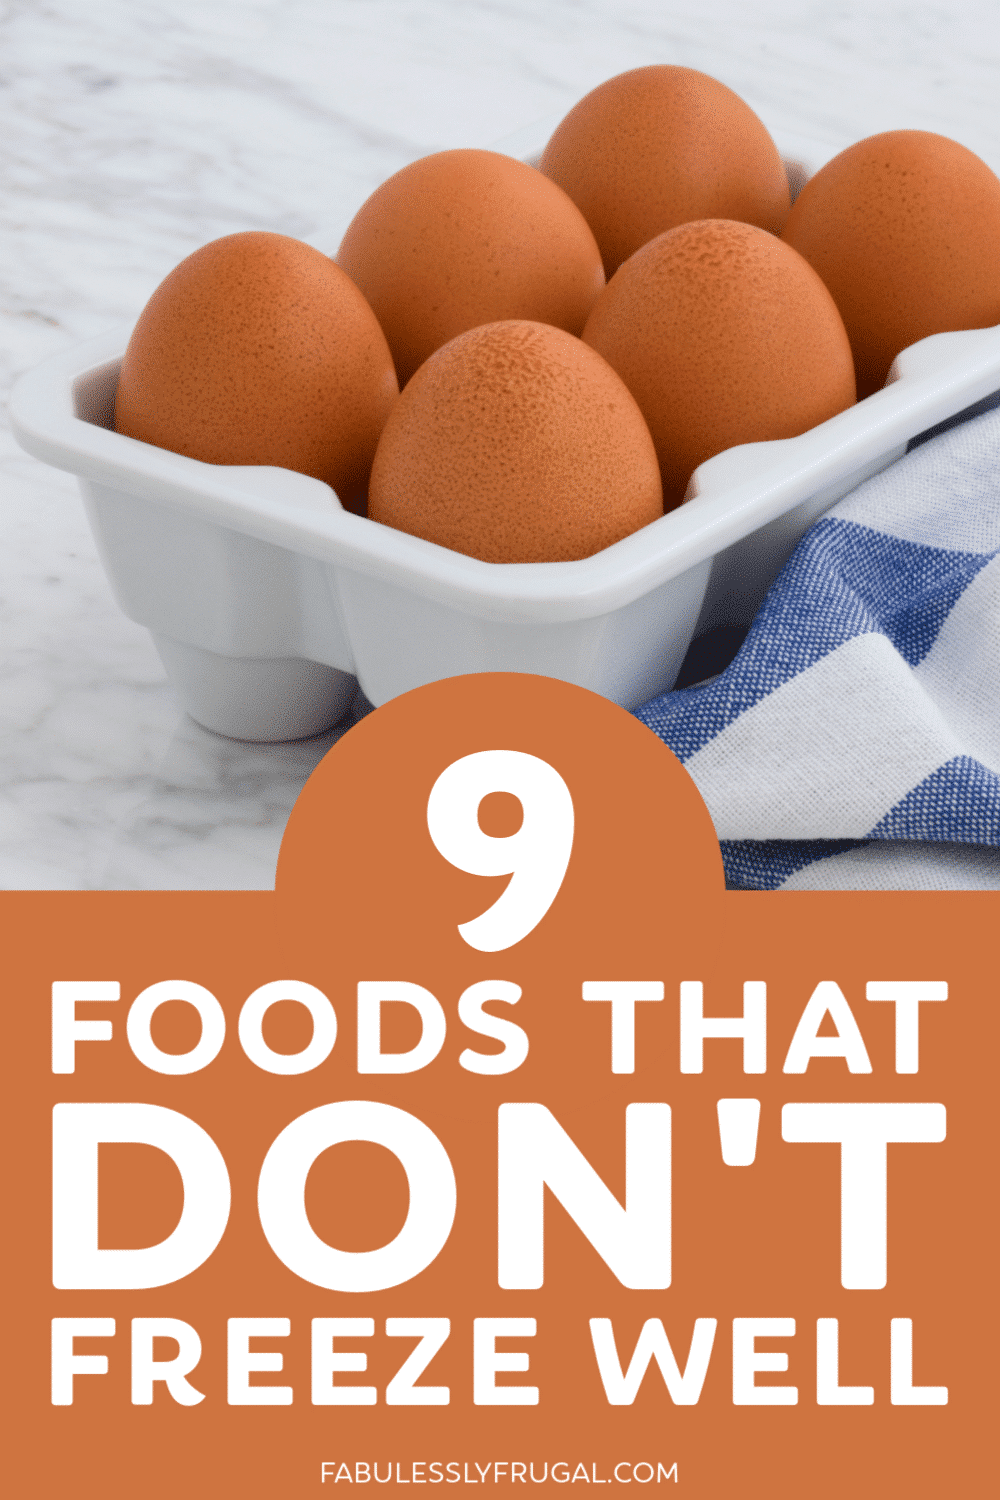 Don't freeze these foods